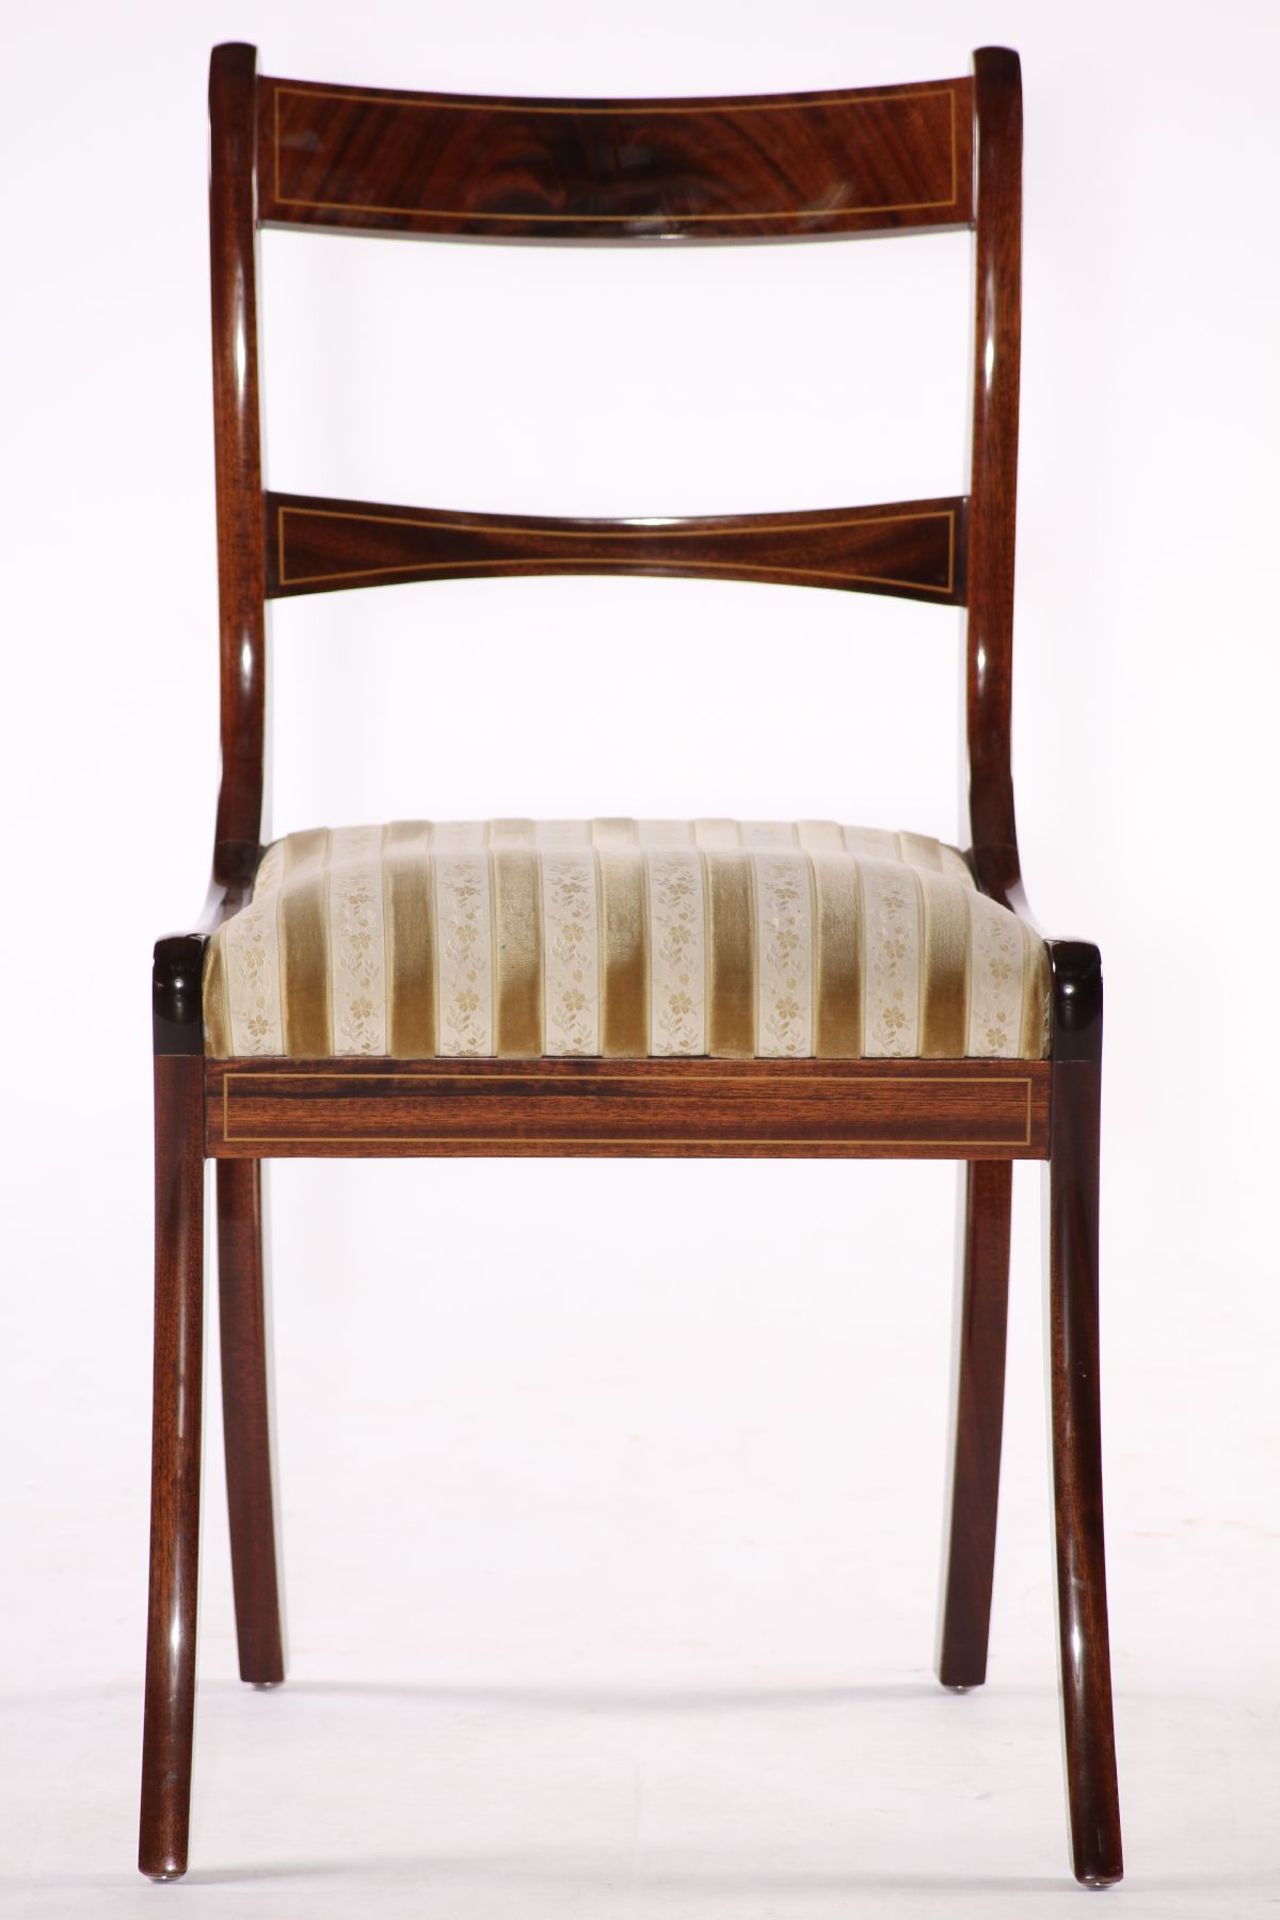 5 chairs, partly solid Mahogany and veneer, elegantly curved, ocher and cream-colored striped fabric - Bild 2 aus 3